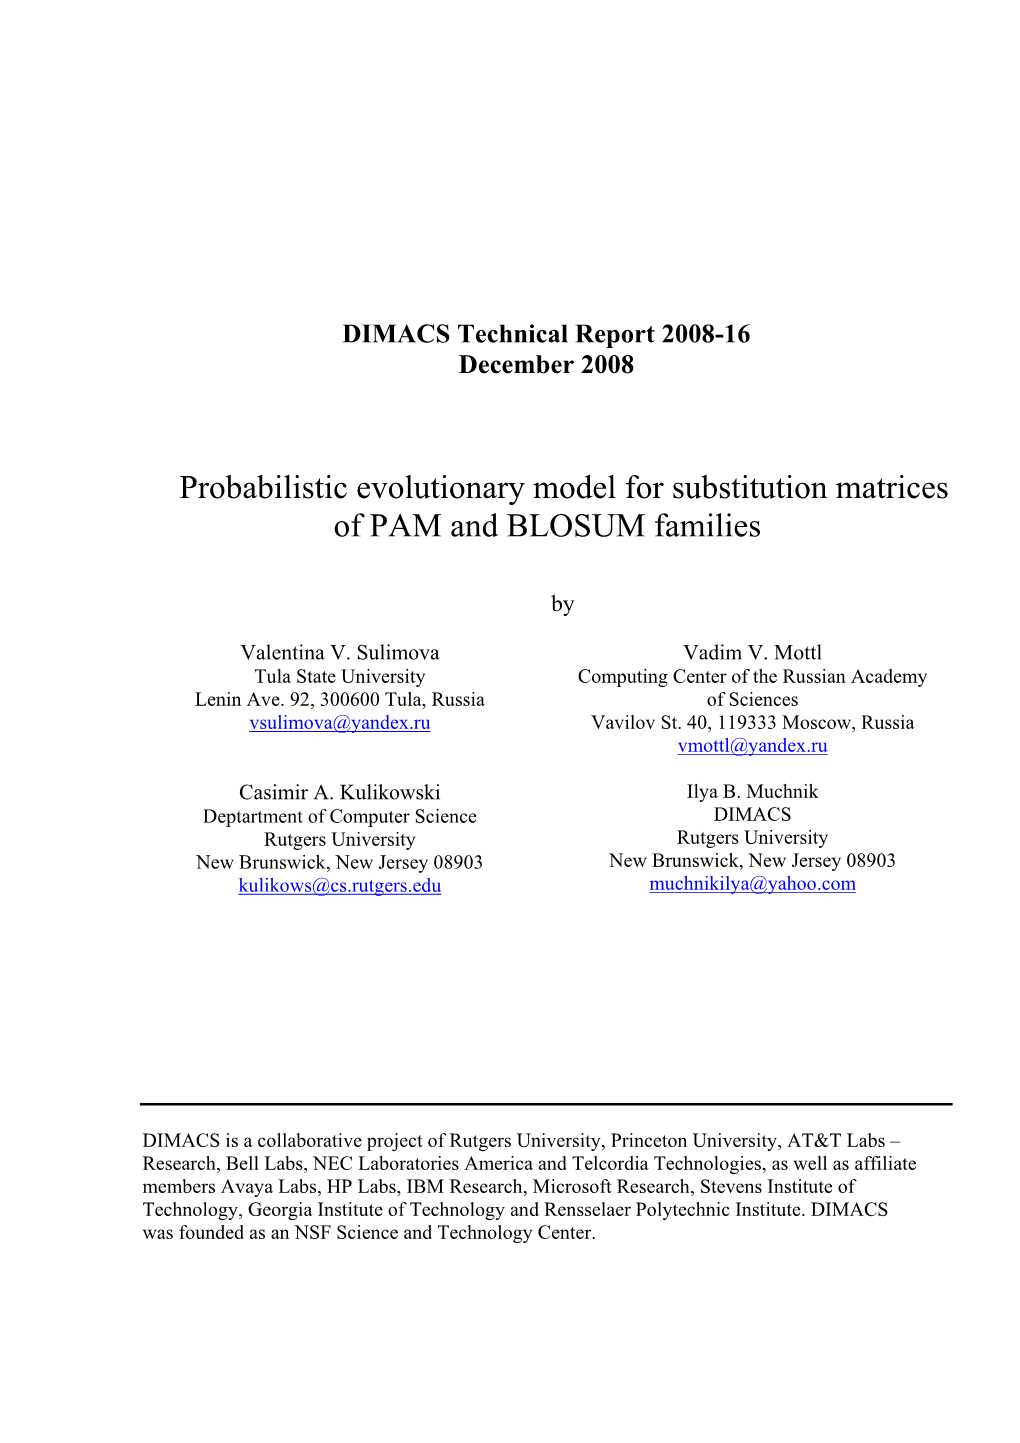 Probabilistic Evolutionary Model for Substitution Matrices of PAM and BLOSUM Families